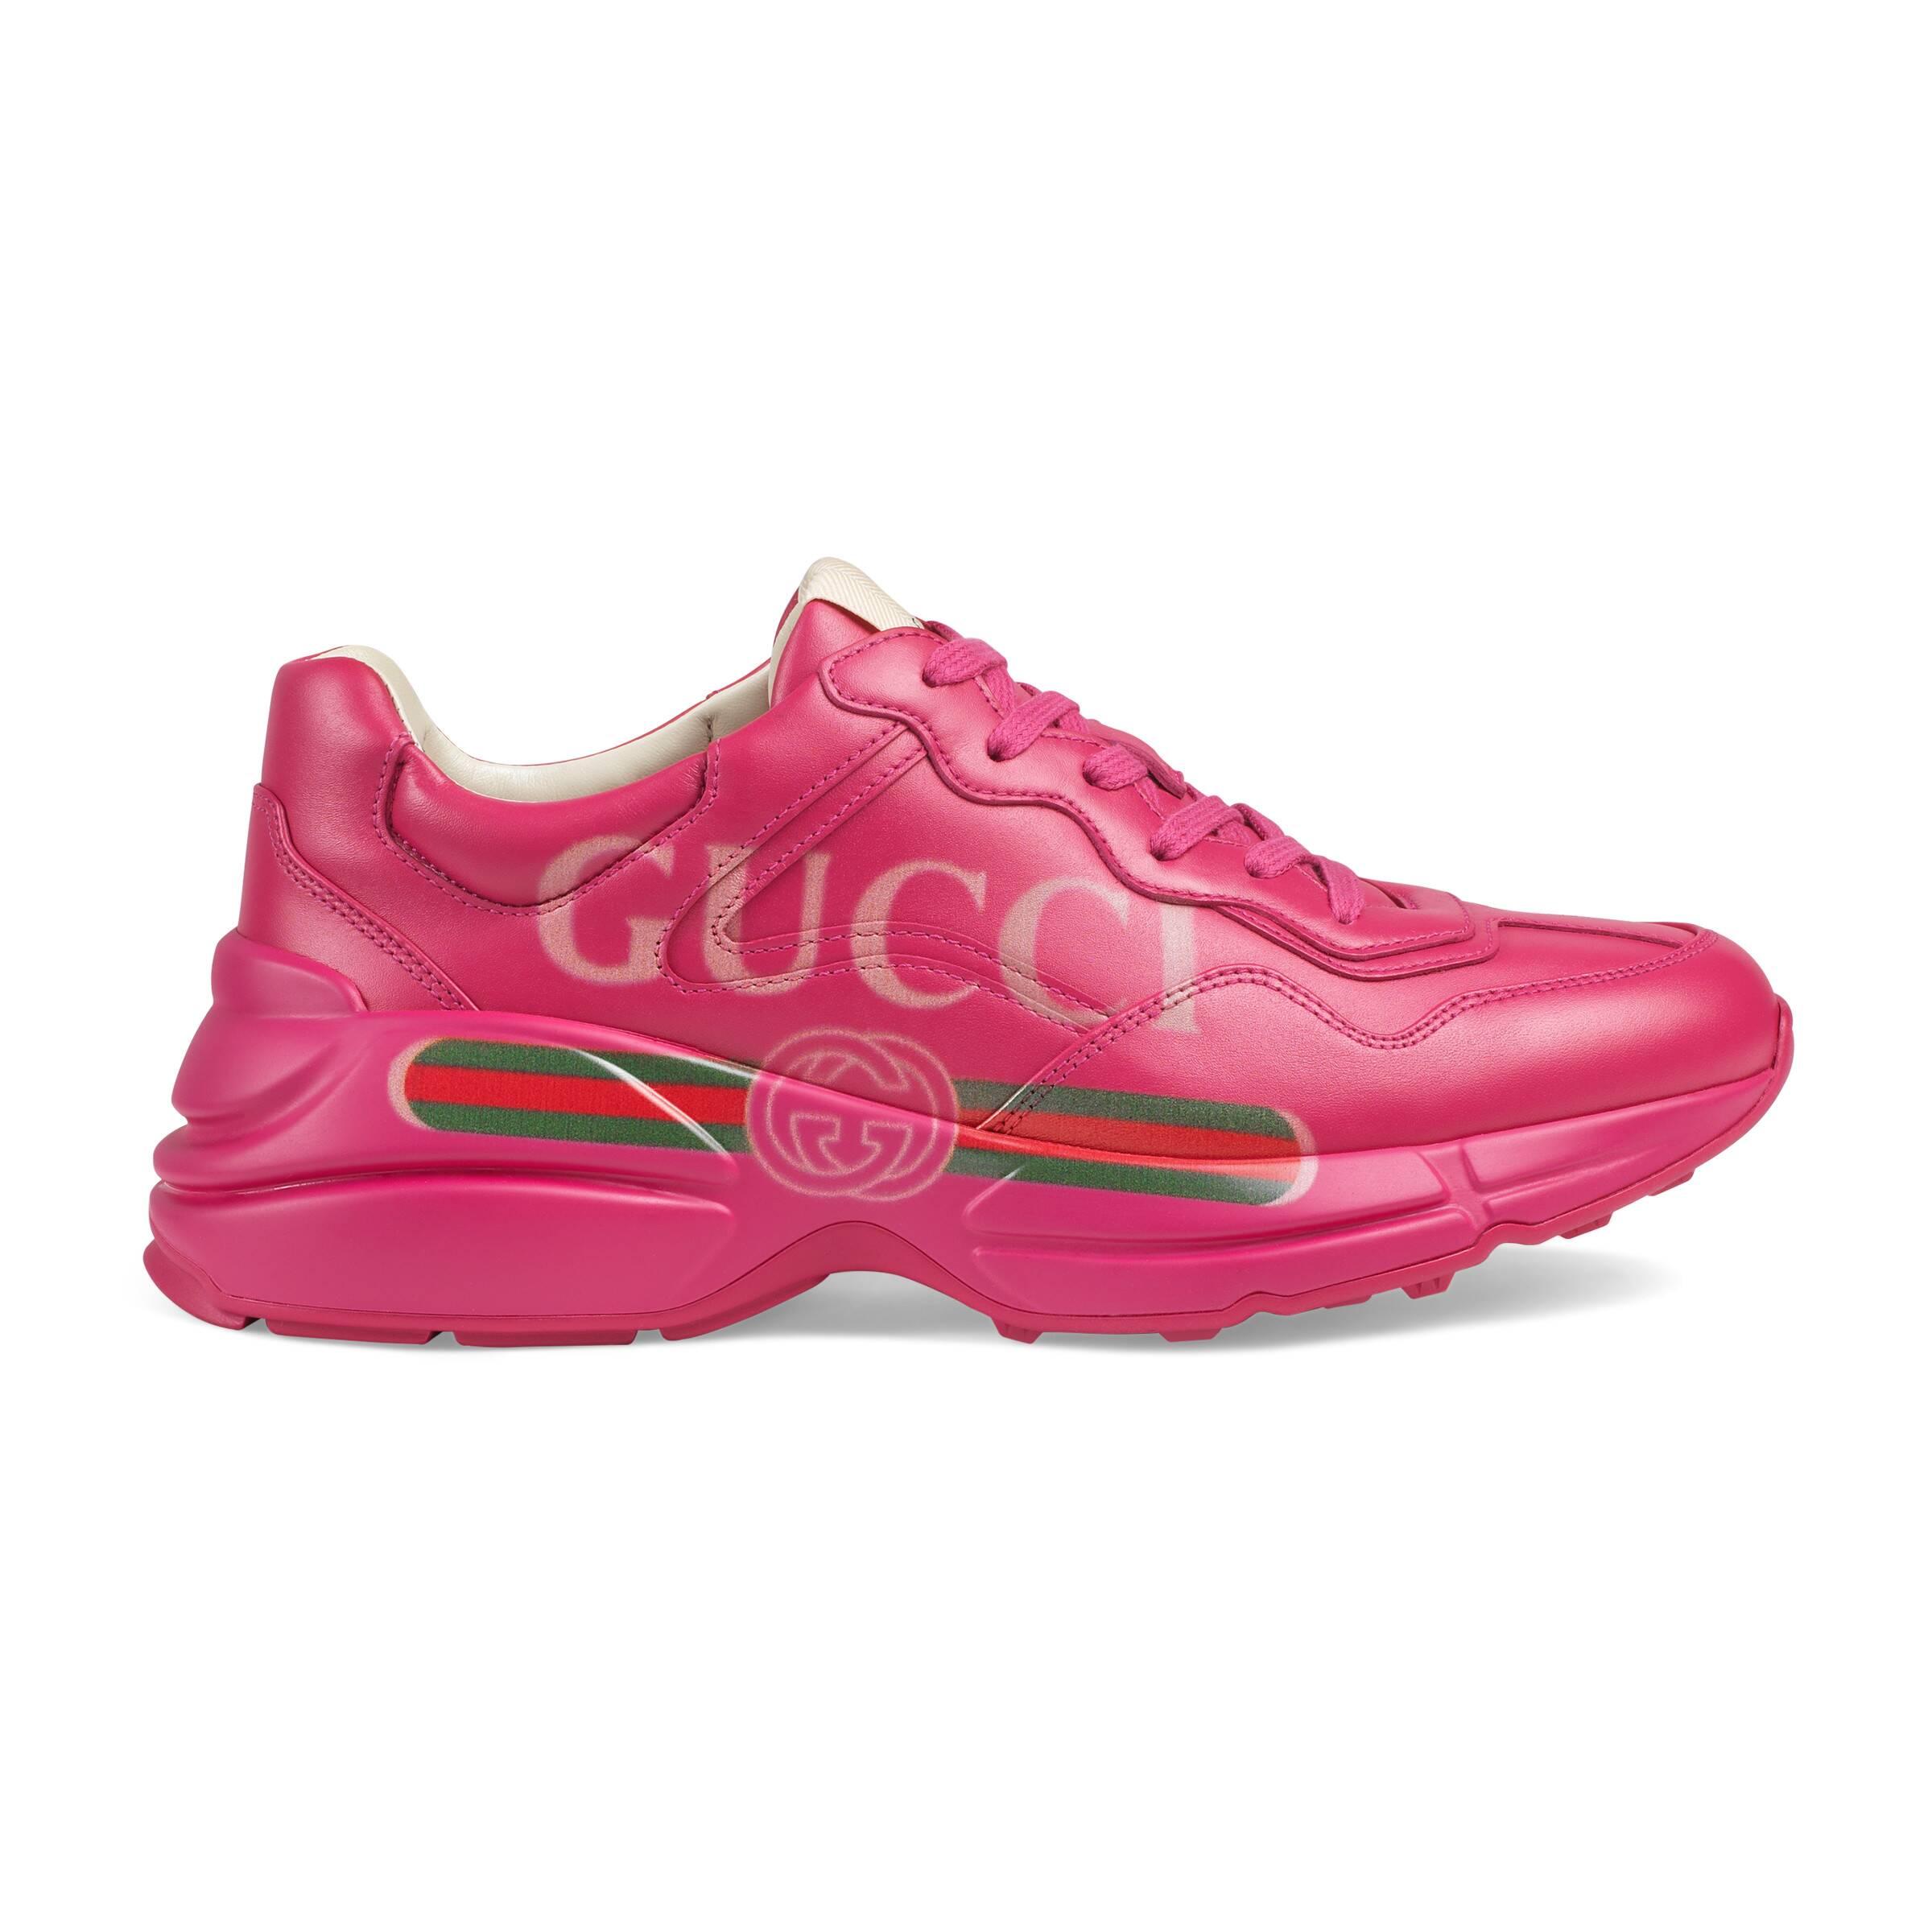 Gucci Logo Leather Sneaker in Pink (Pink) -